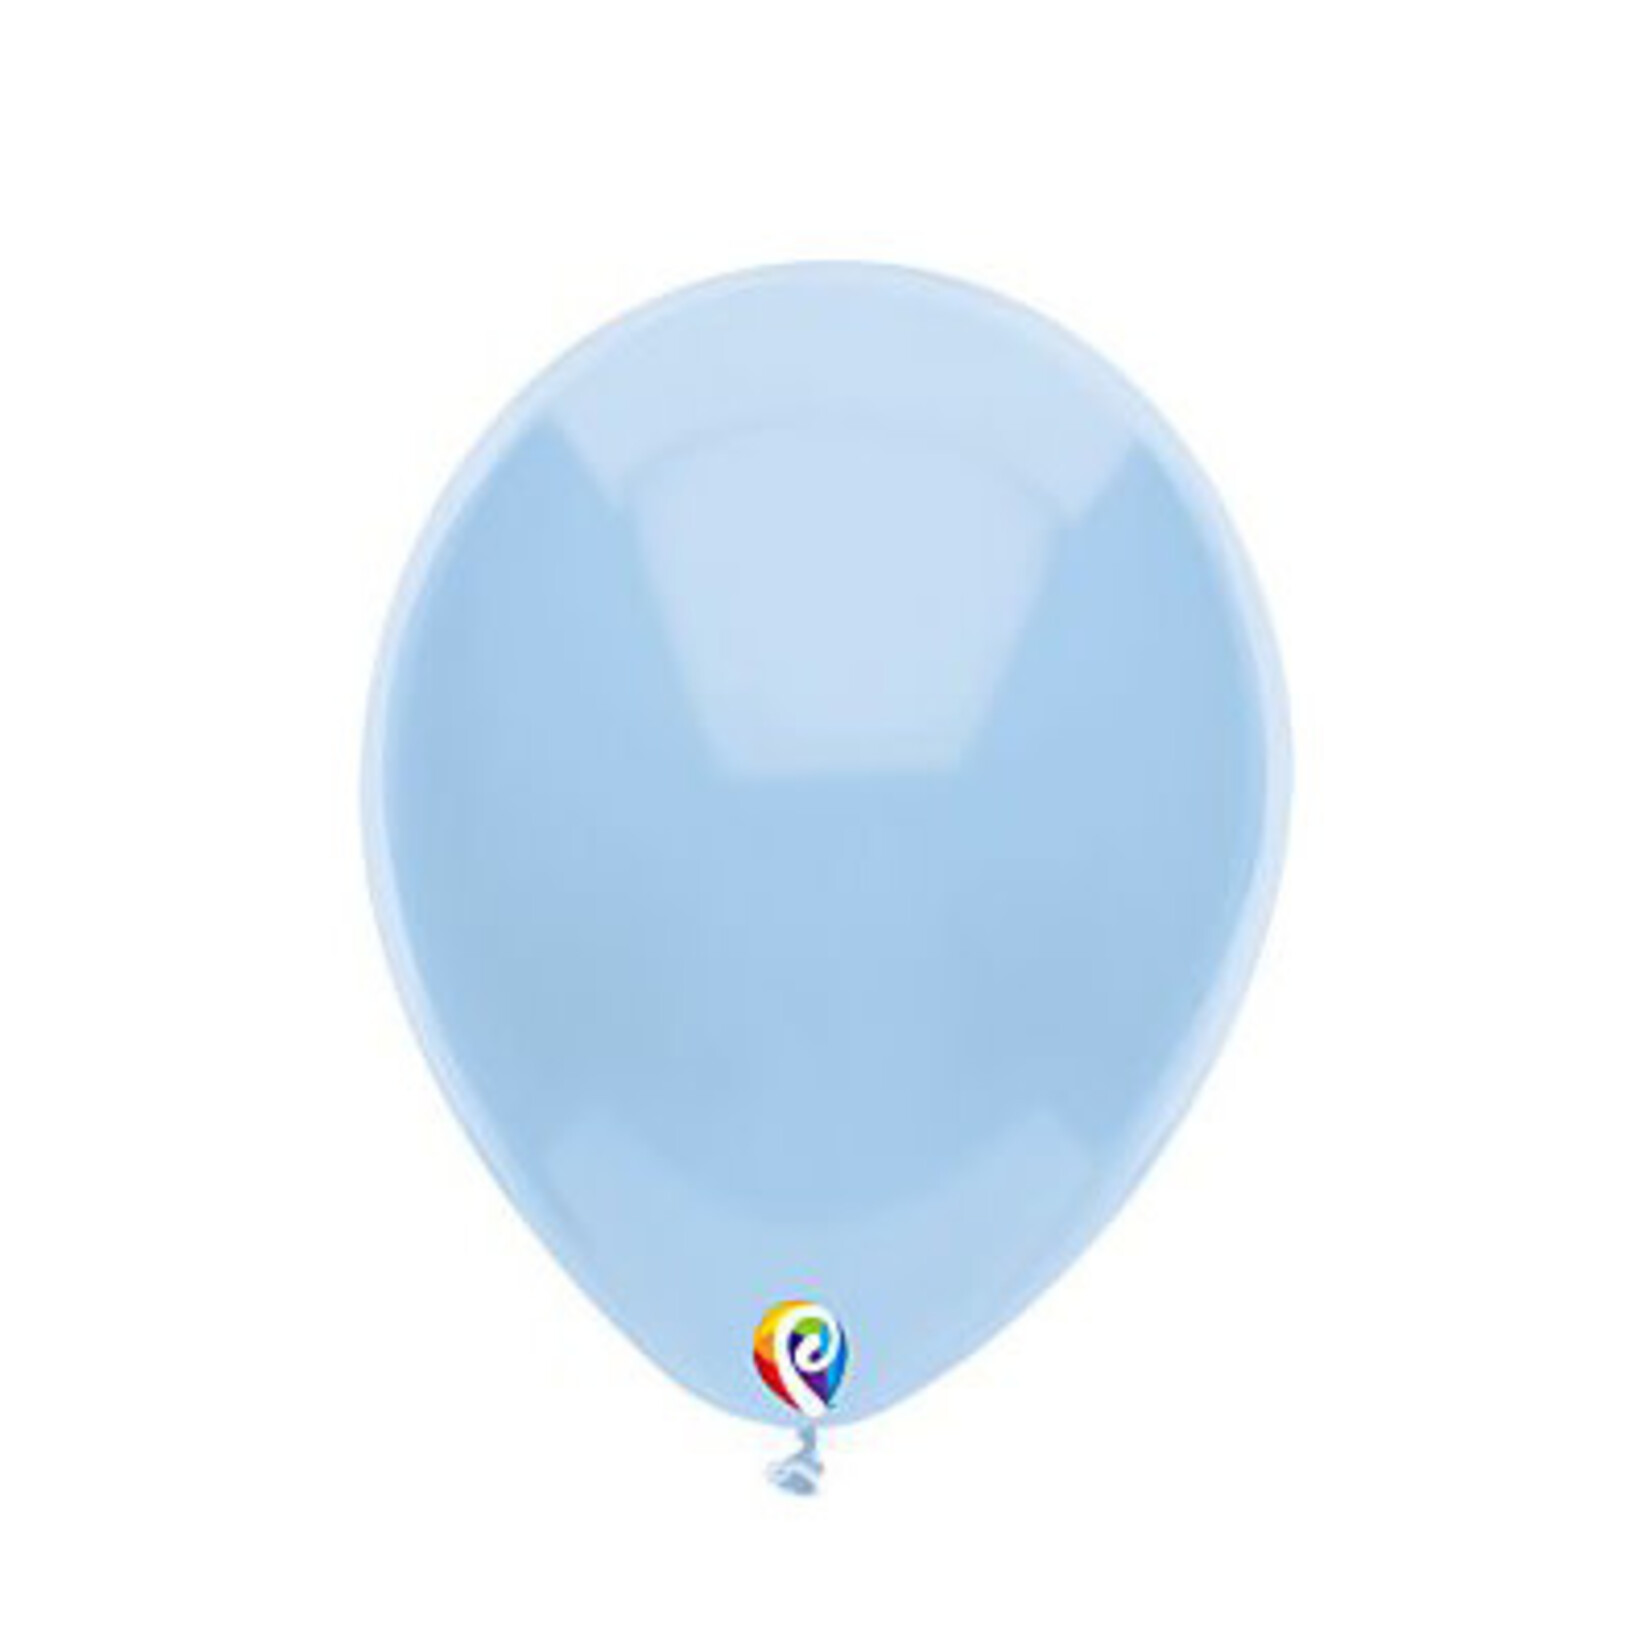 Funsational 12" Baby Blue Latex Balloons - 15ct.